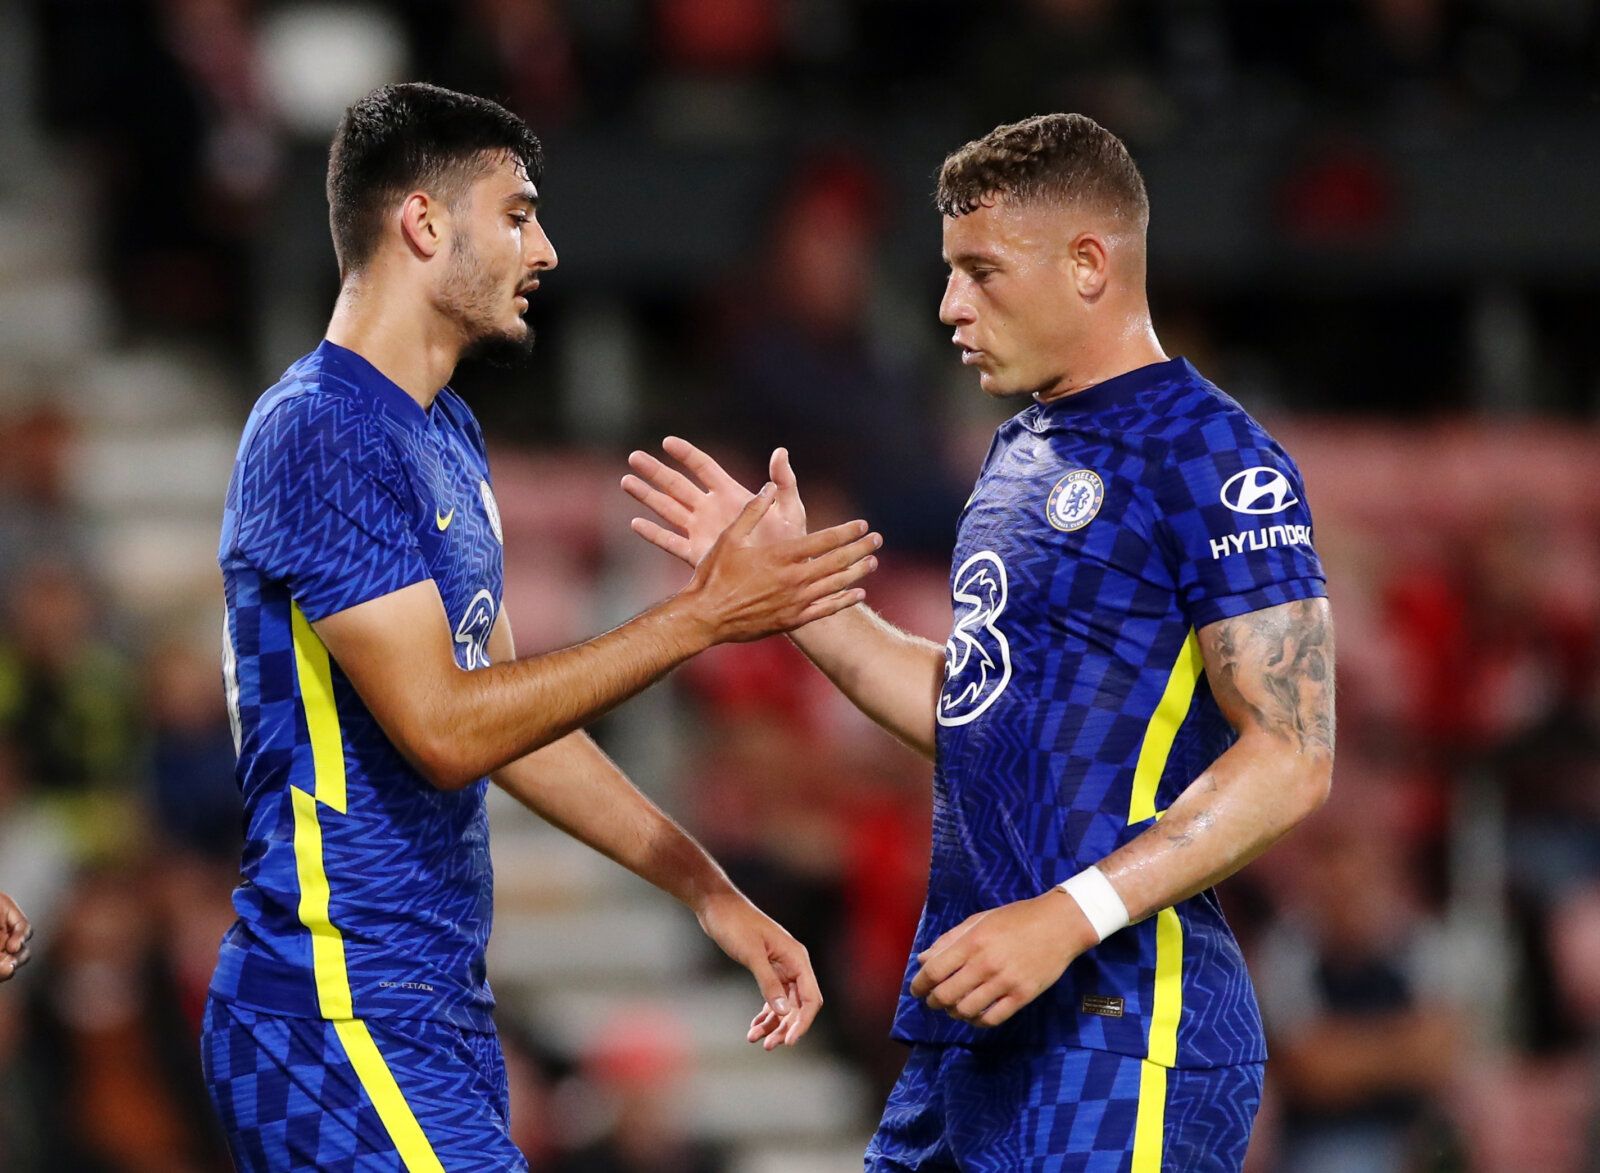 Soccer Football - Pre Season Friendly - AFC Bournemouth v Chelsea - Vitality Stadium, Bournemouth, Britain - July 27, 2021 Chelsea's Armando Broja celebrates scoring their first goal with Ross Barkley Action Images via Reuters/Peter Cziborra